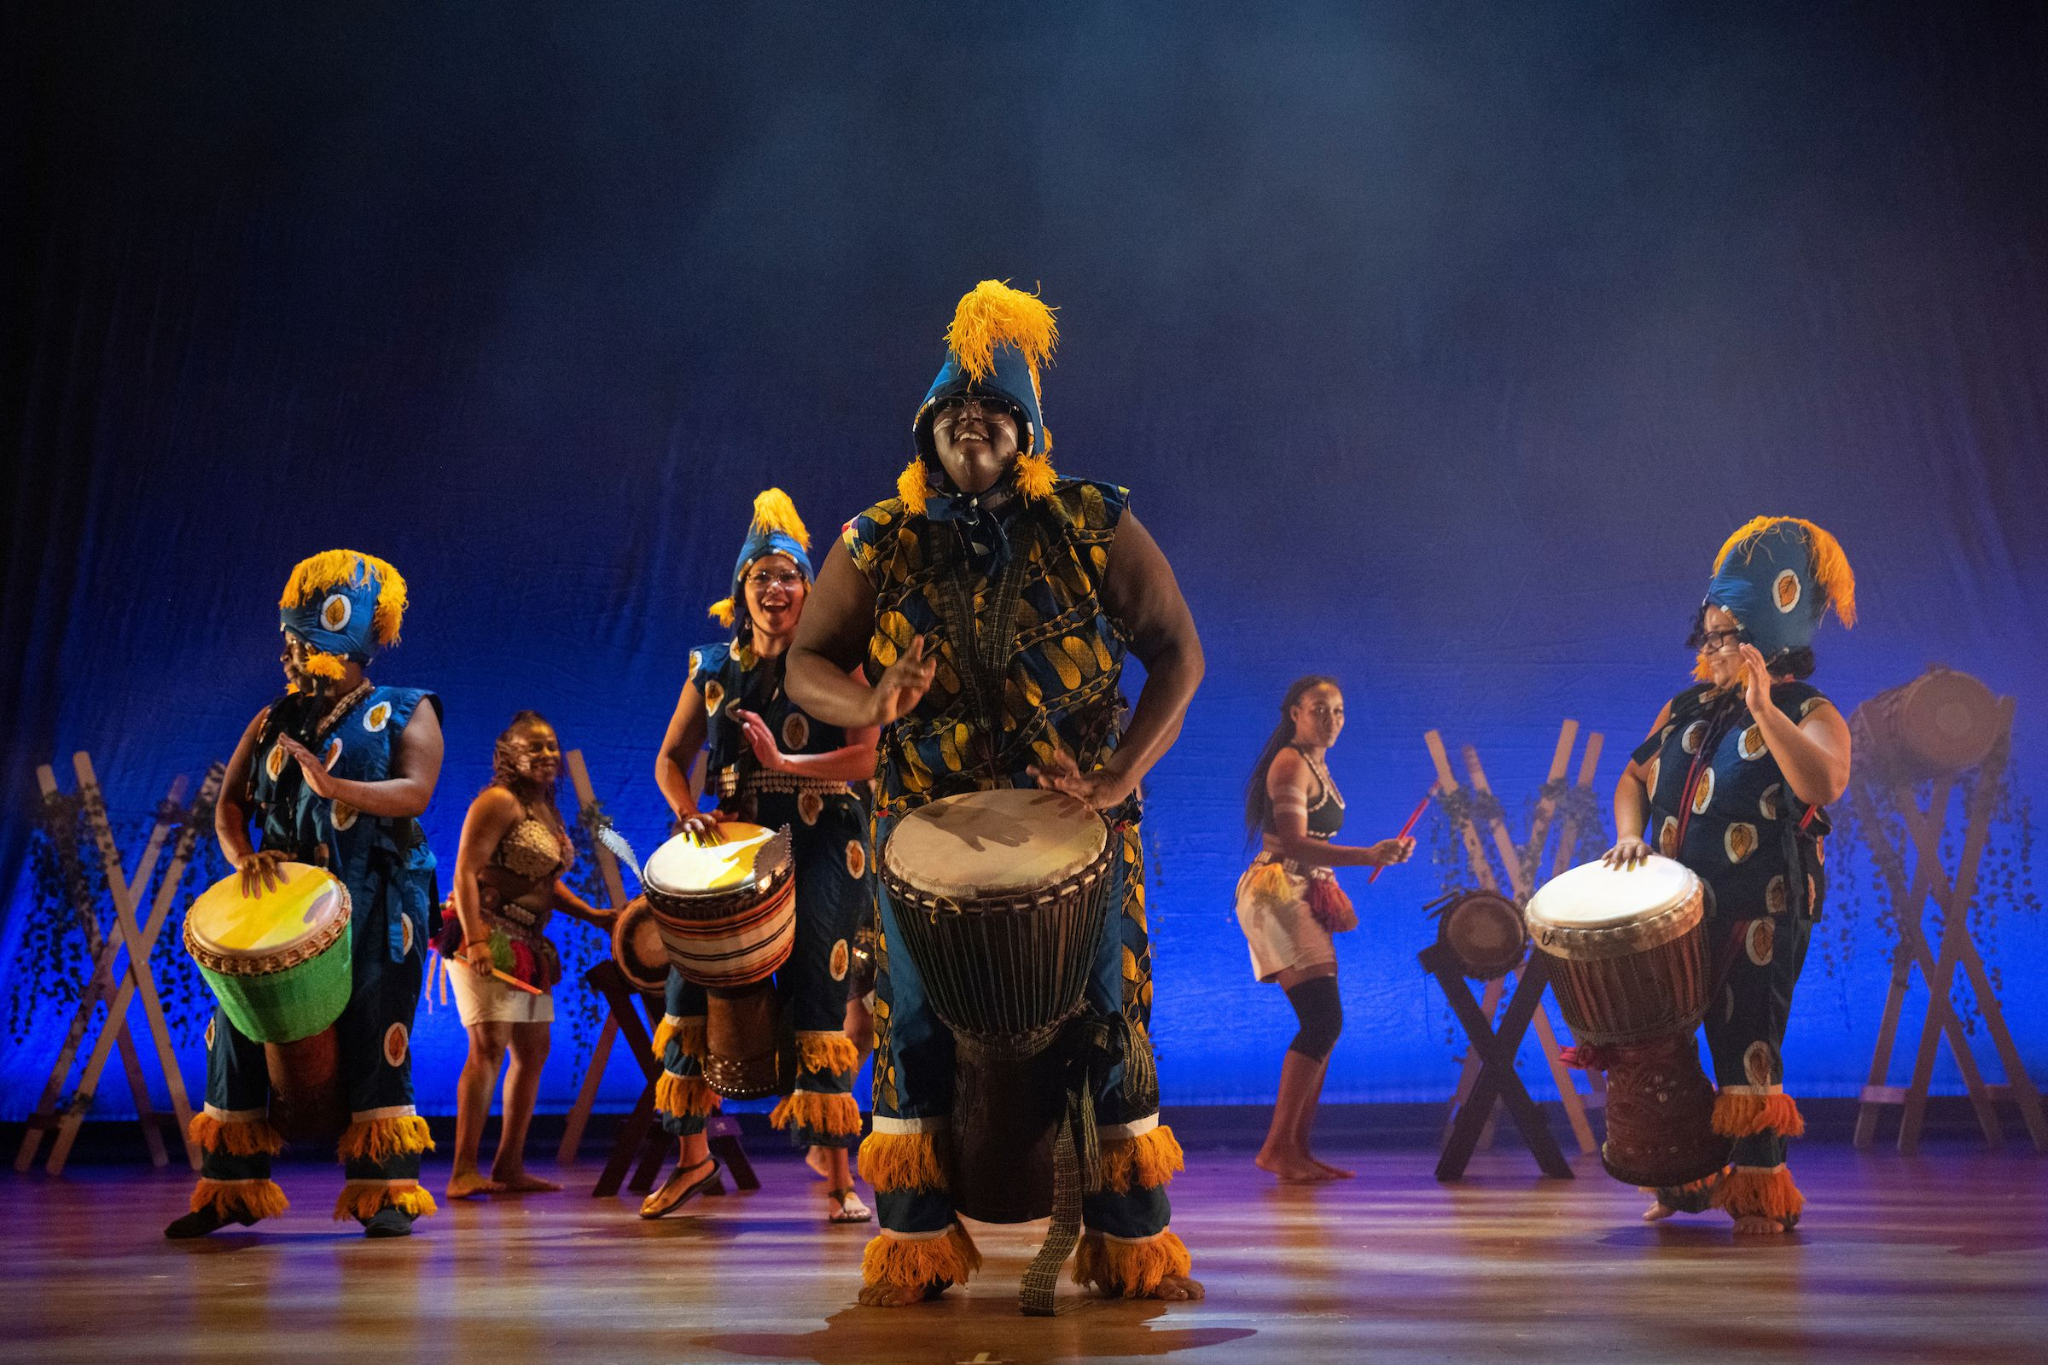 Several performers wearing traditional African regalia dance and play instruments including drums